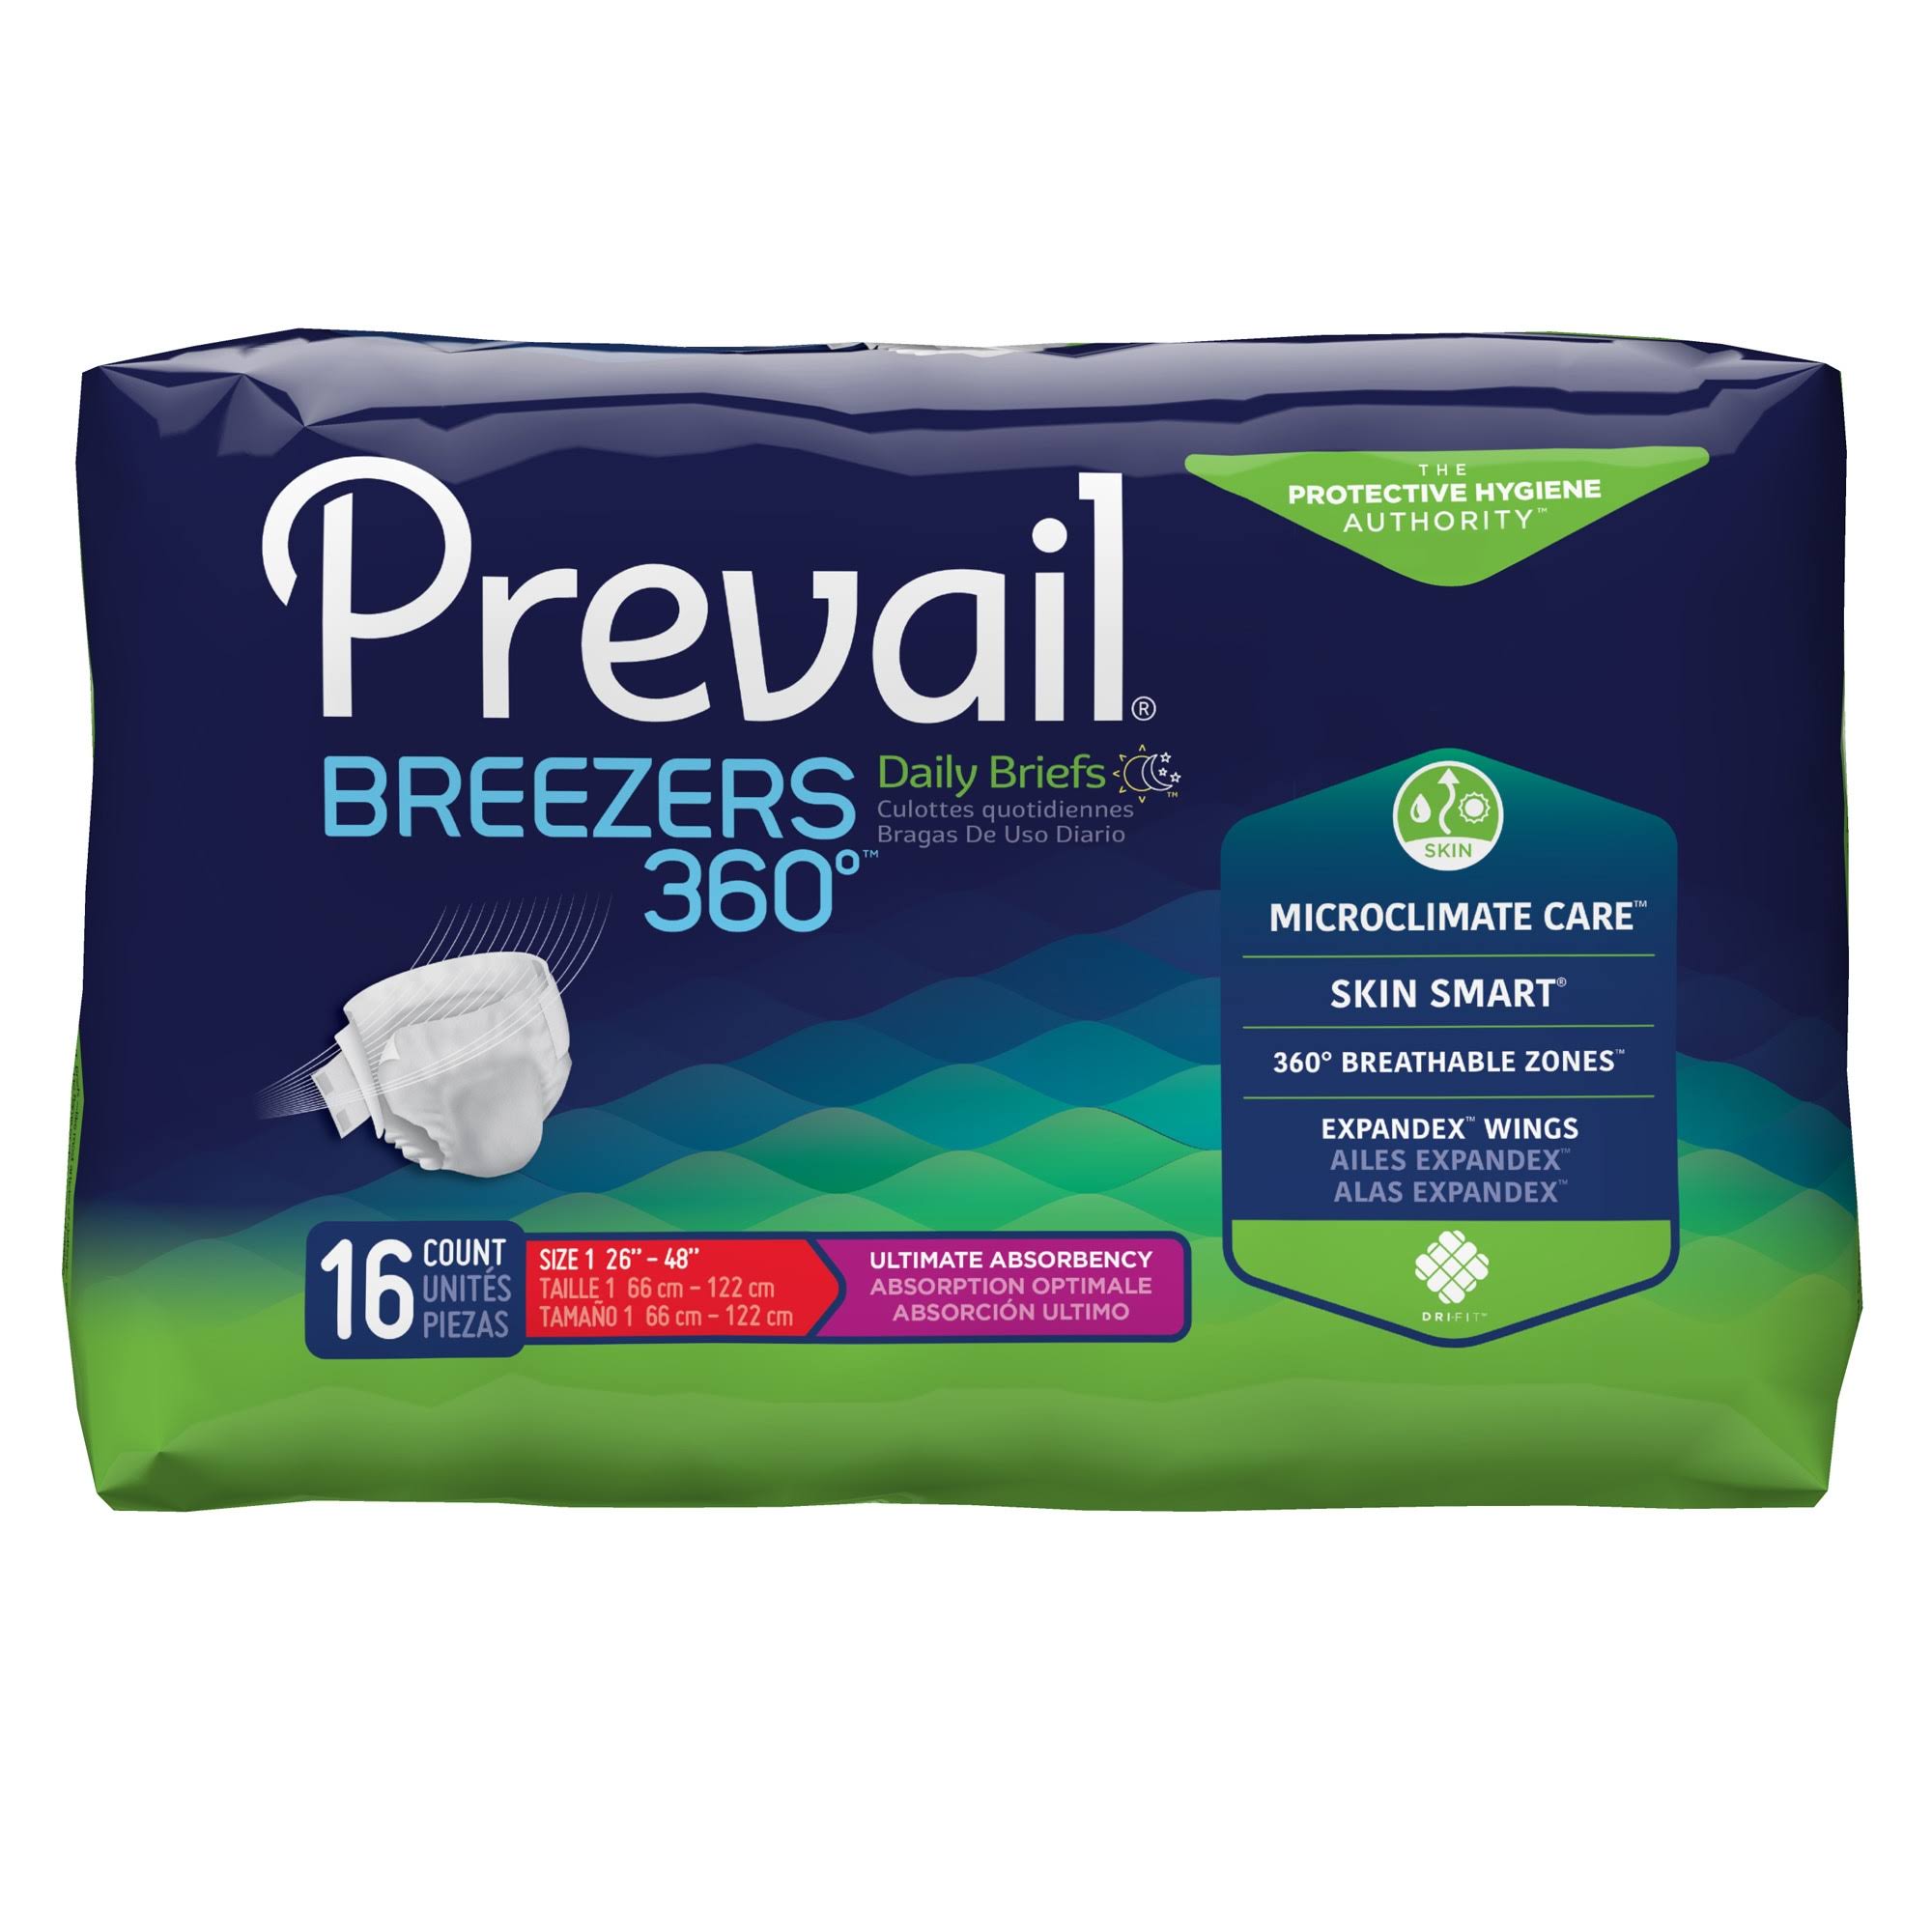 Prevail Unisex Breezers 360 Maximum Absorbency Incontinence Briefs - Size 1, x16